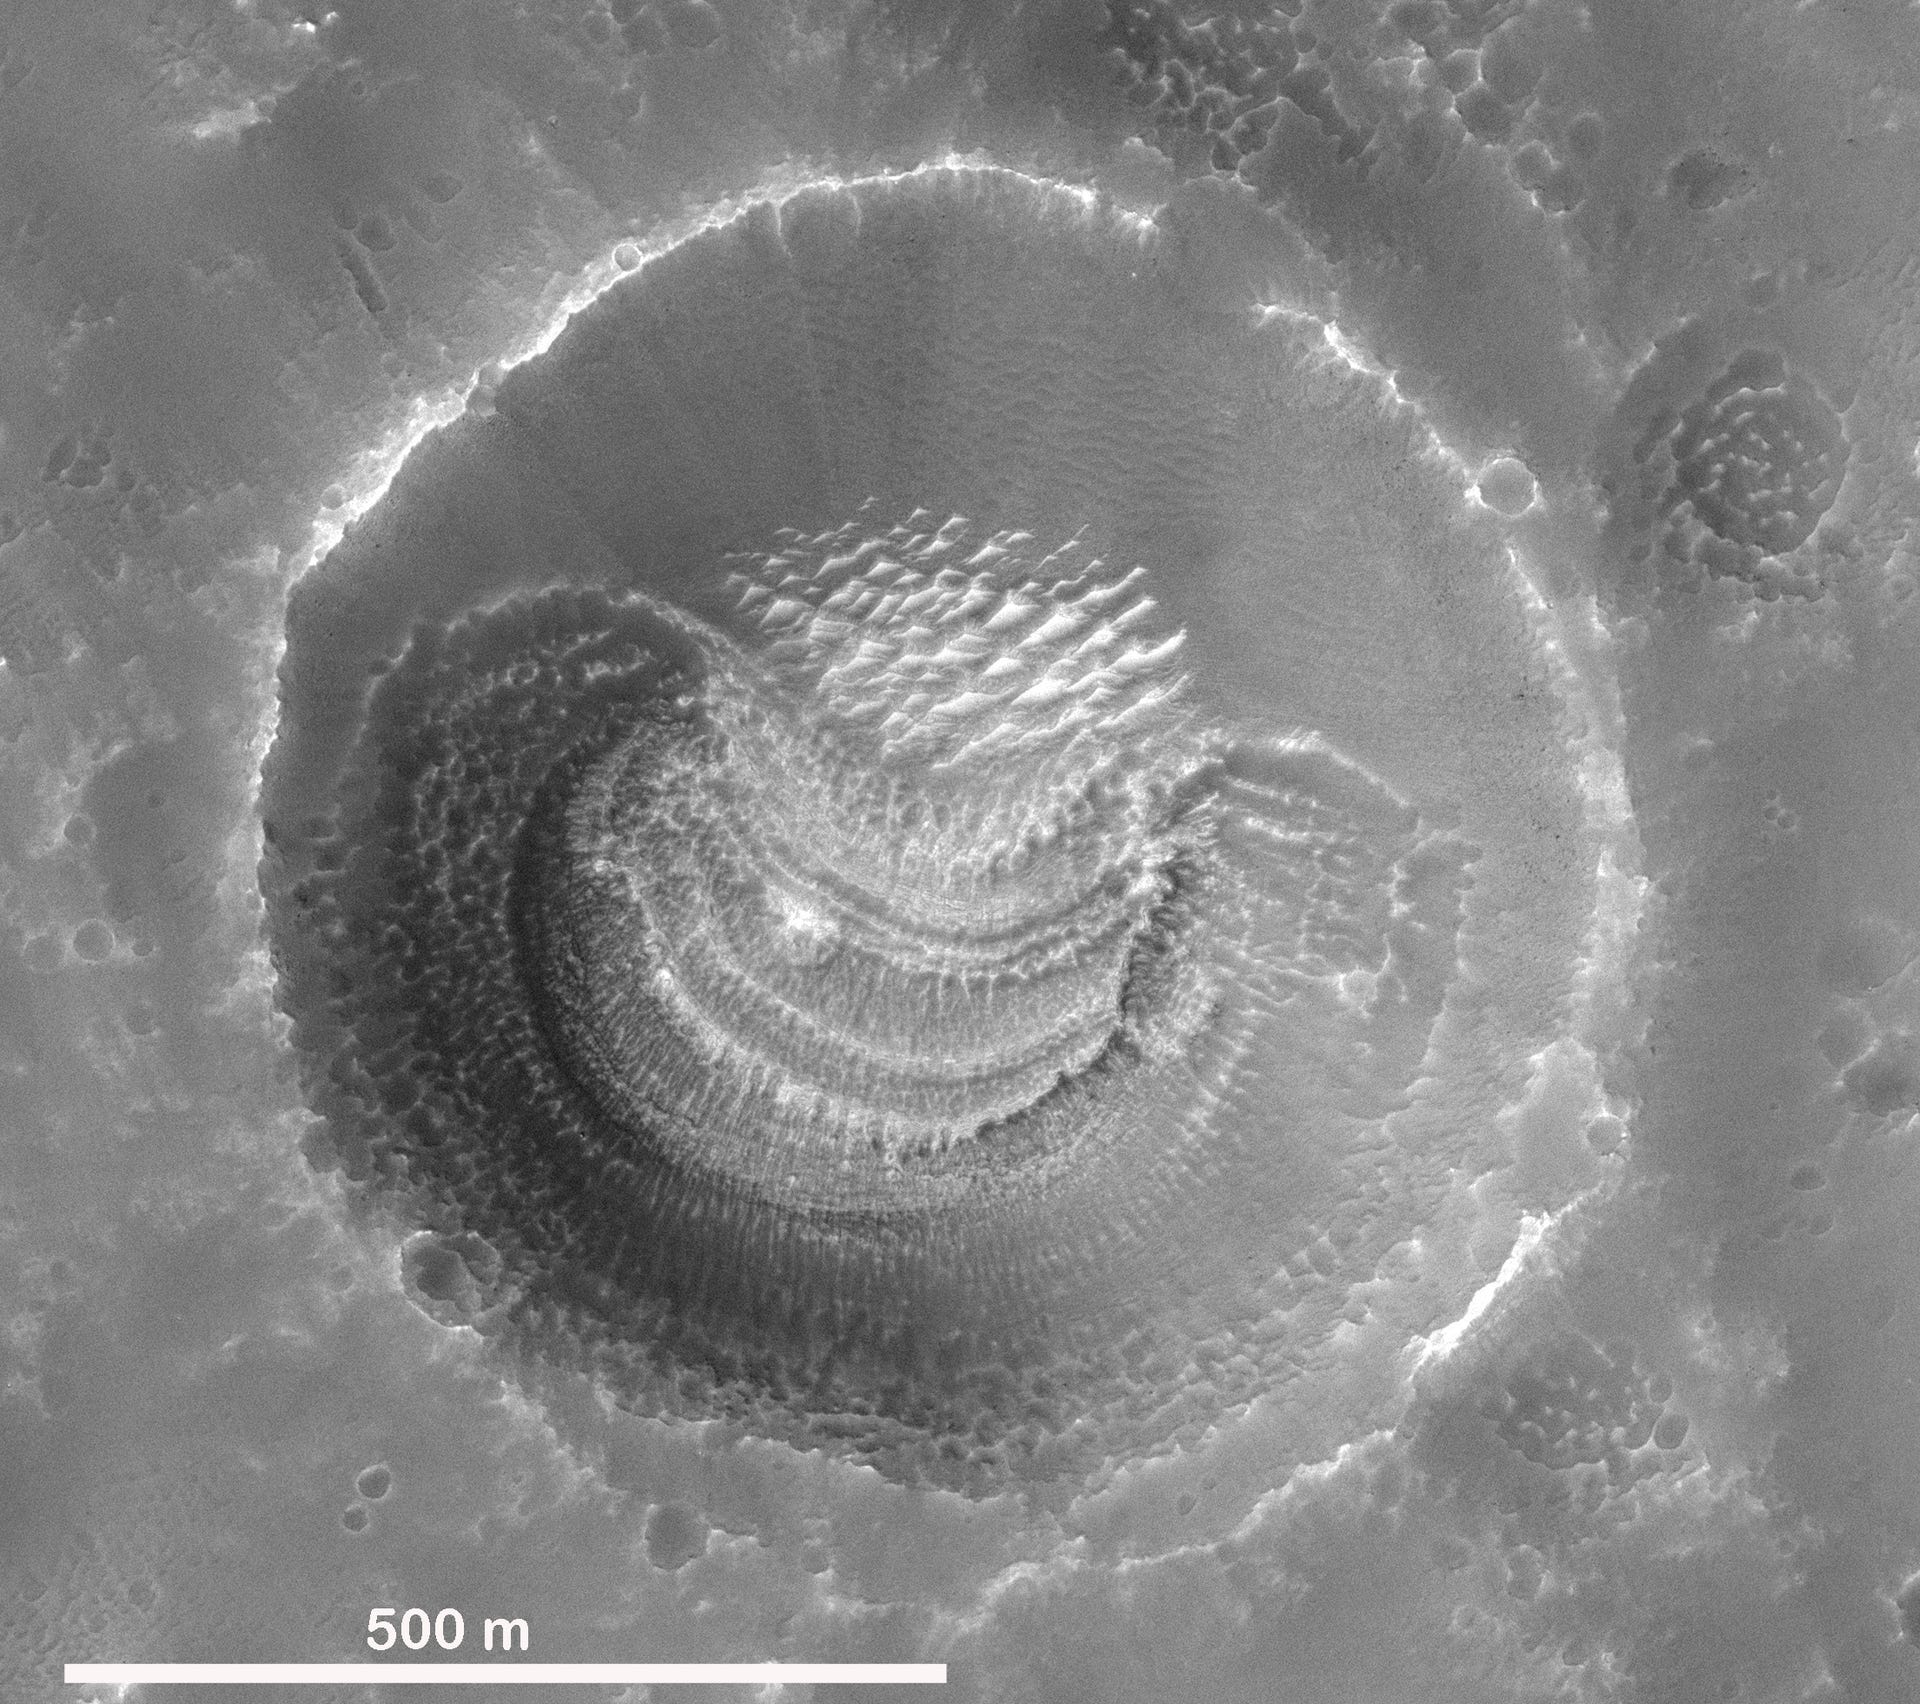 Black-and-white, overhead view of a Mars impact crater with unusual layered deposits on the south side.